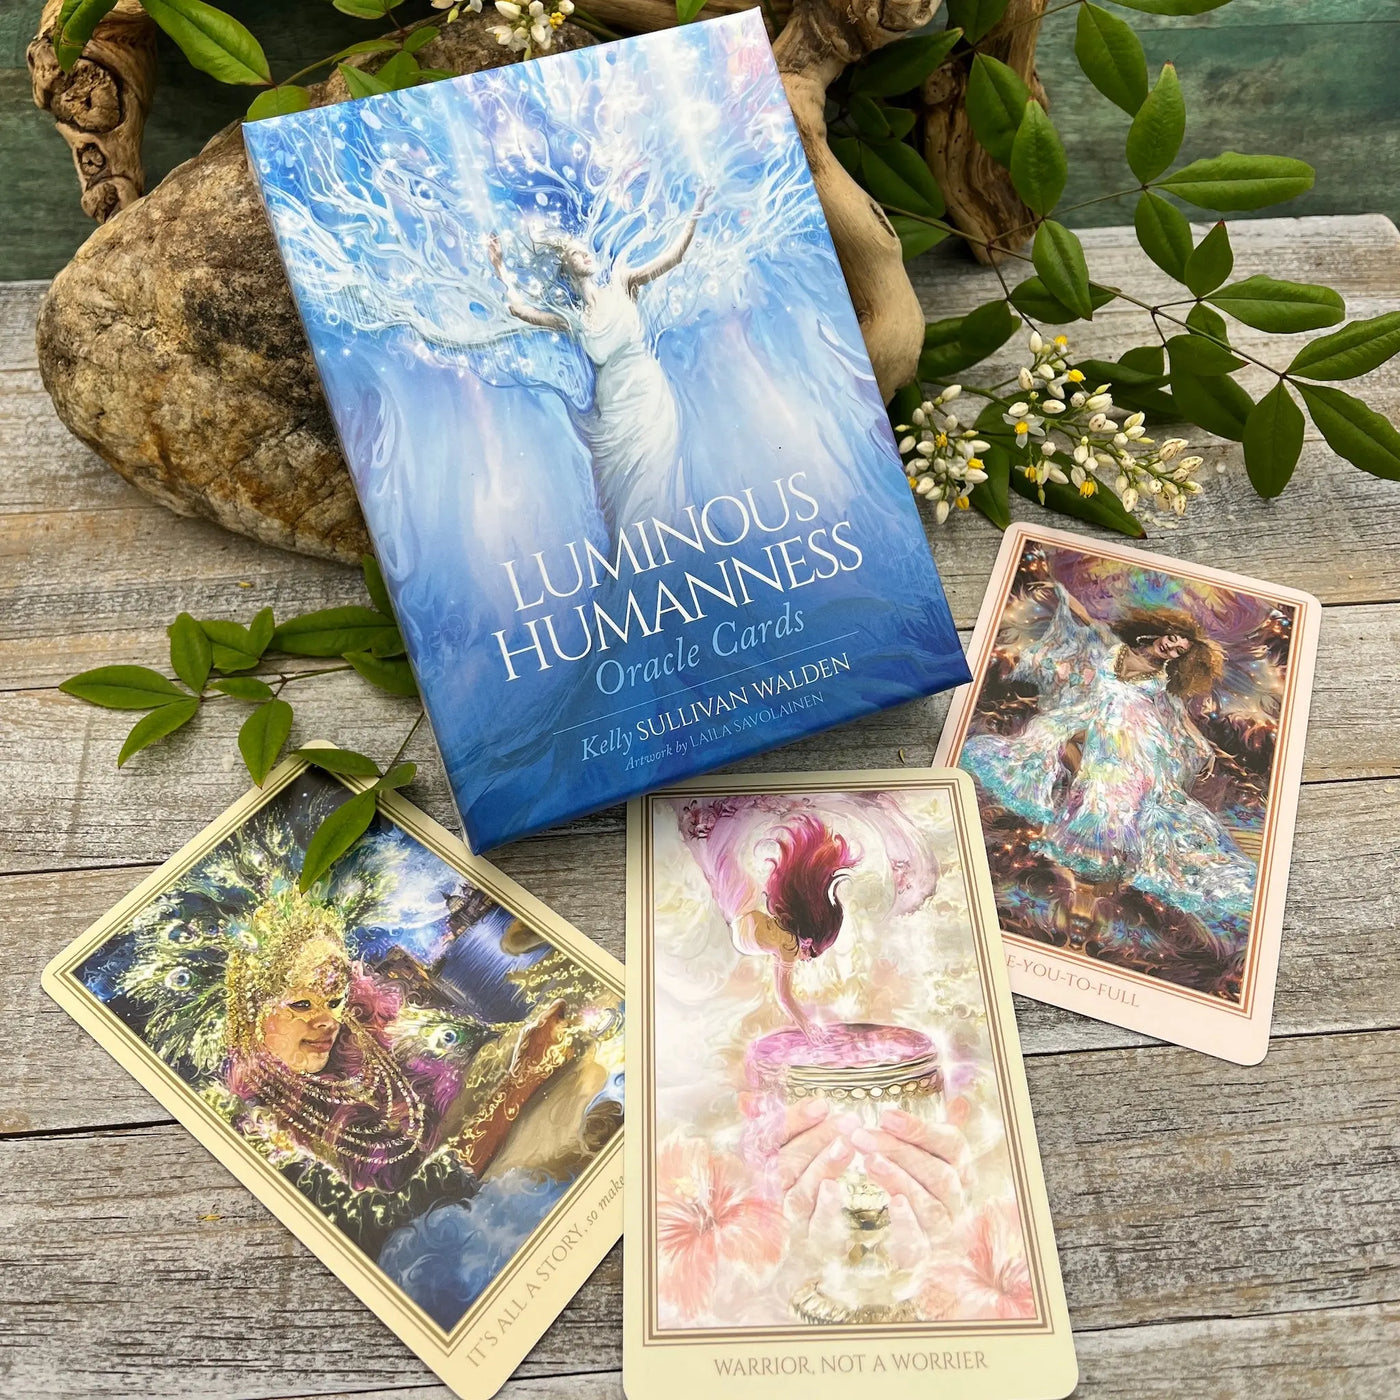 Luminous Humanness Oracle Cards